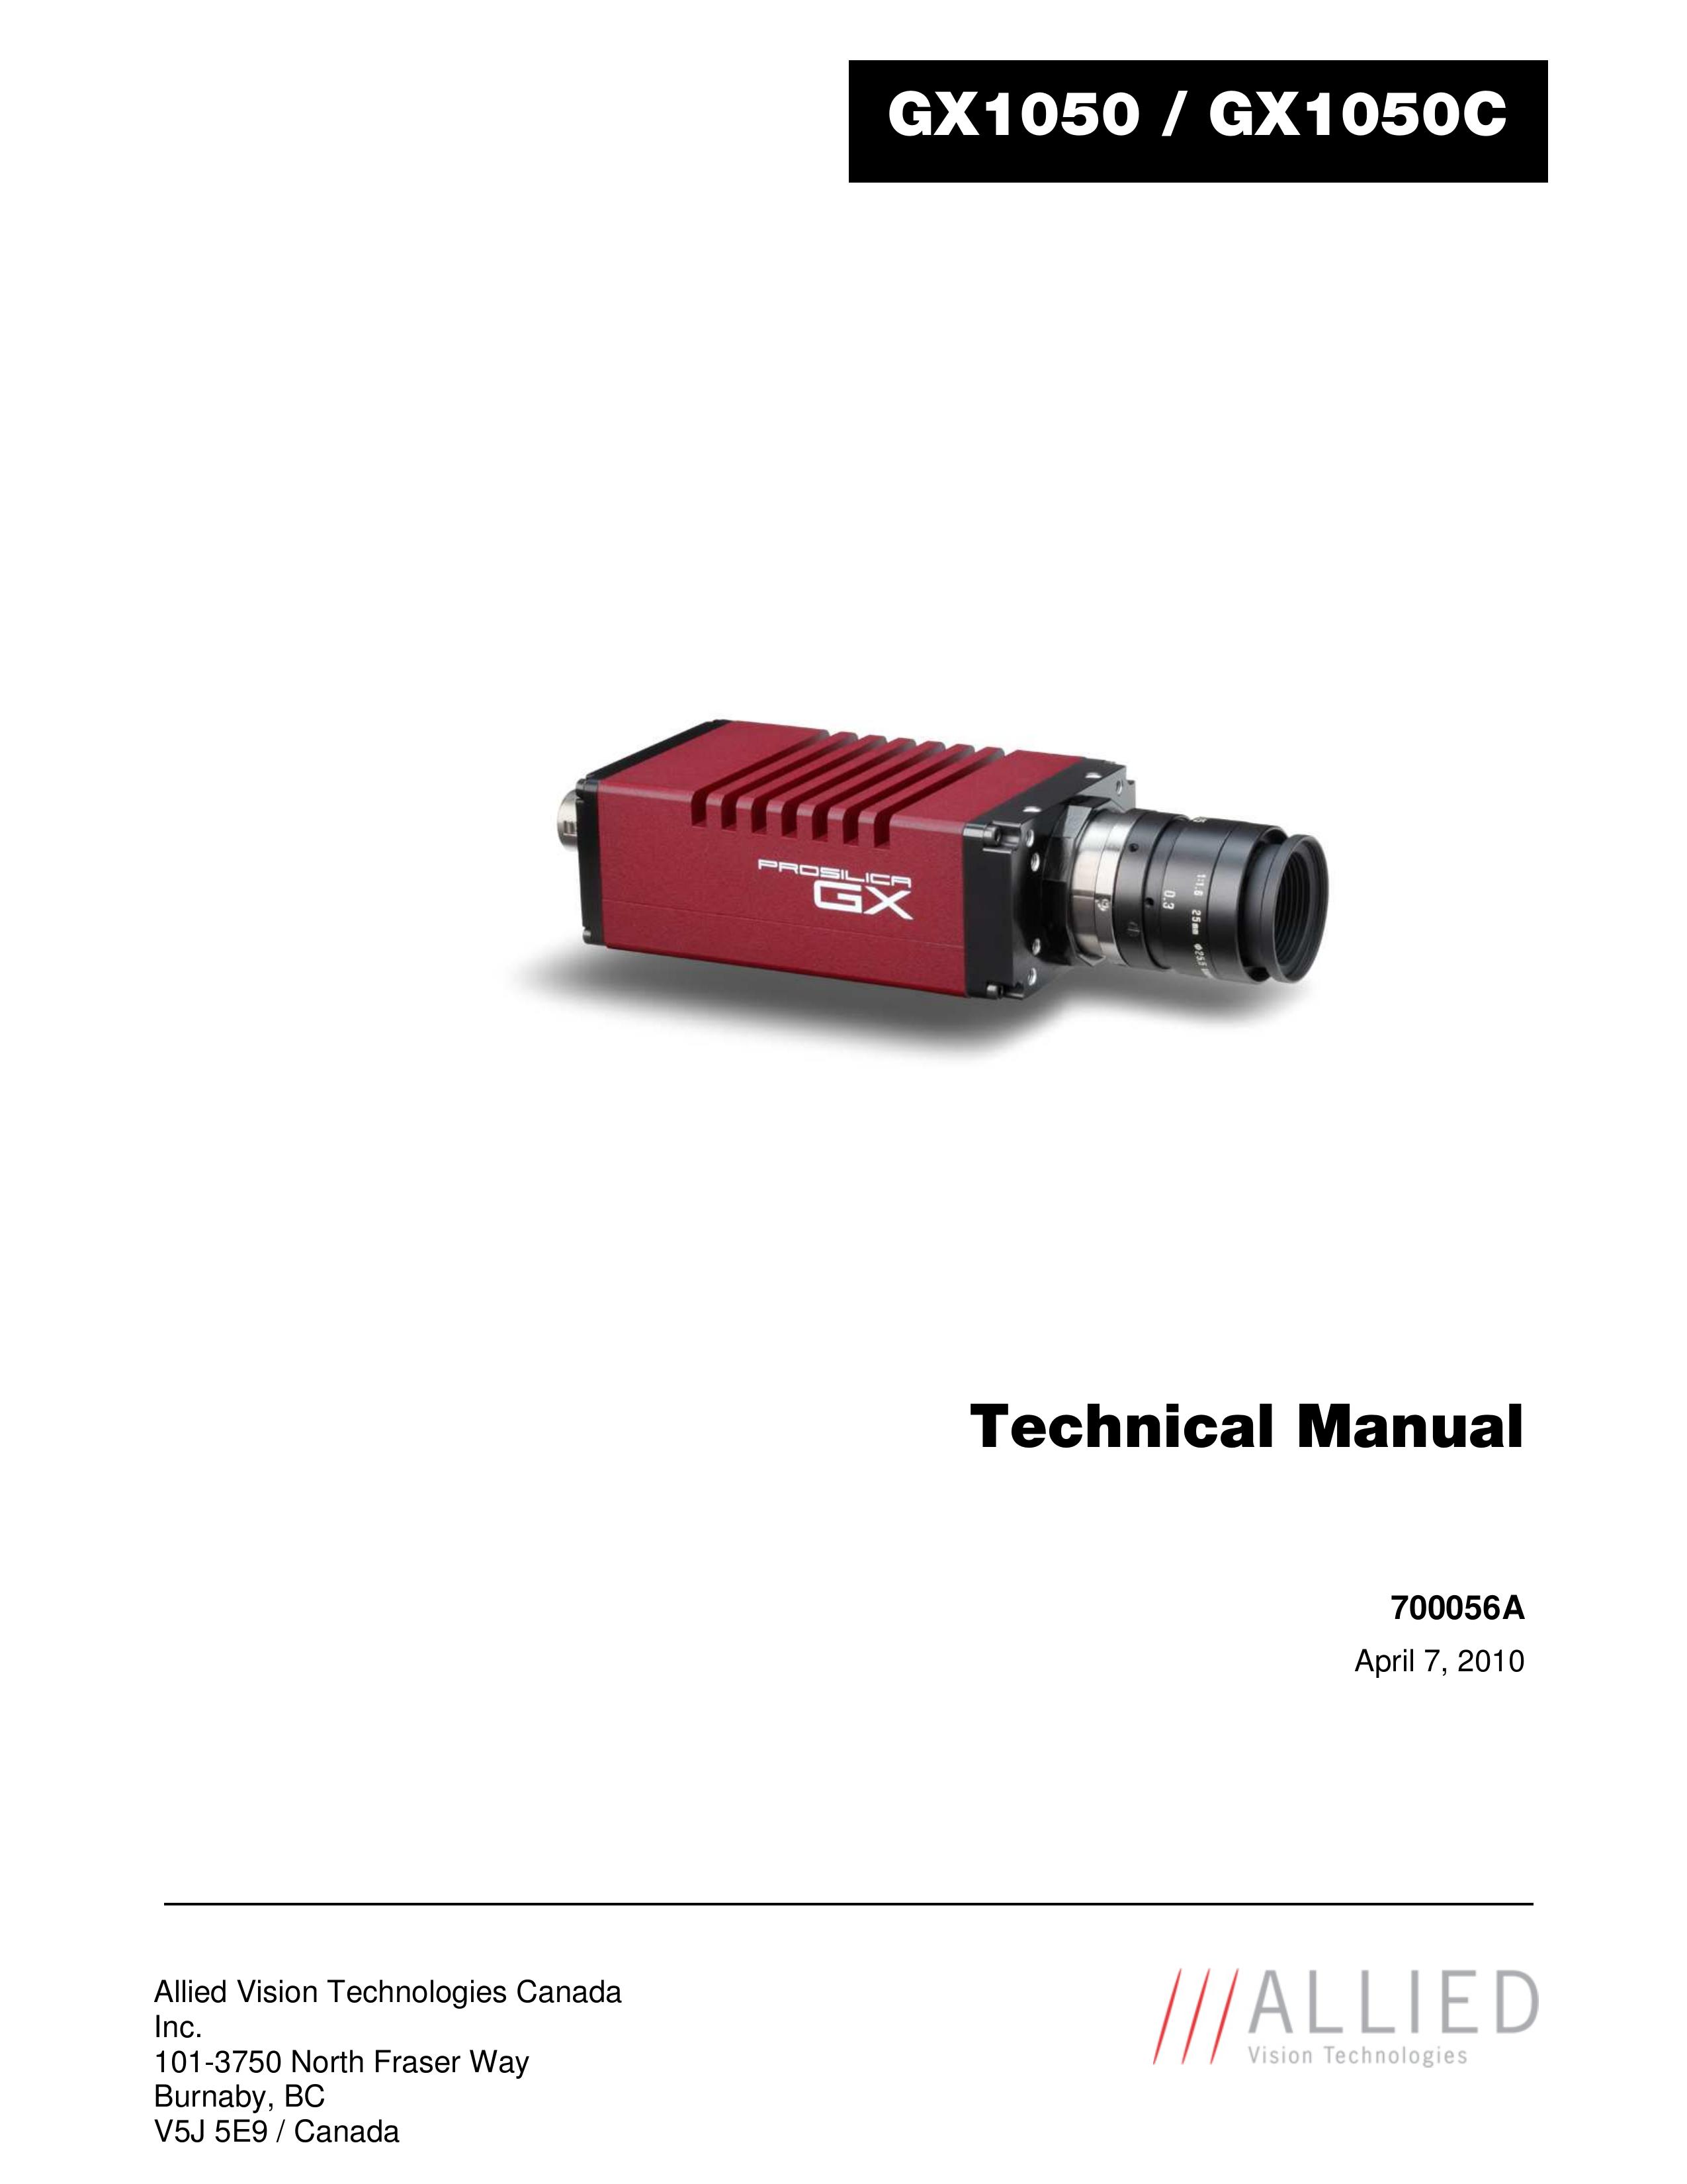 Allied International GX1050 Camcorder User Manual (Page 1)